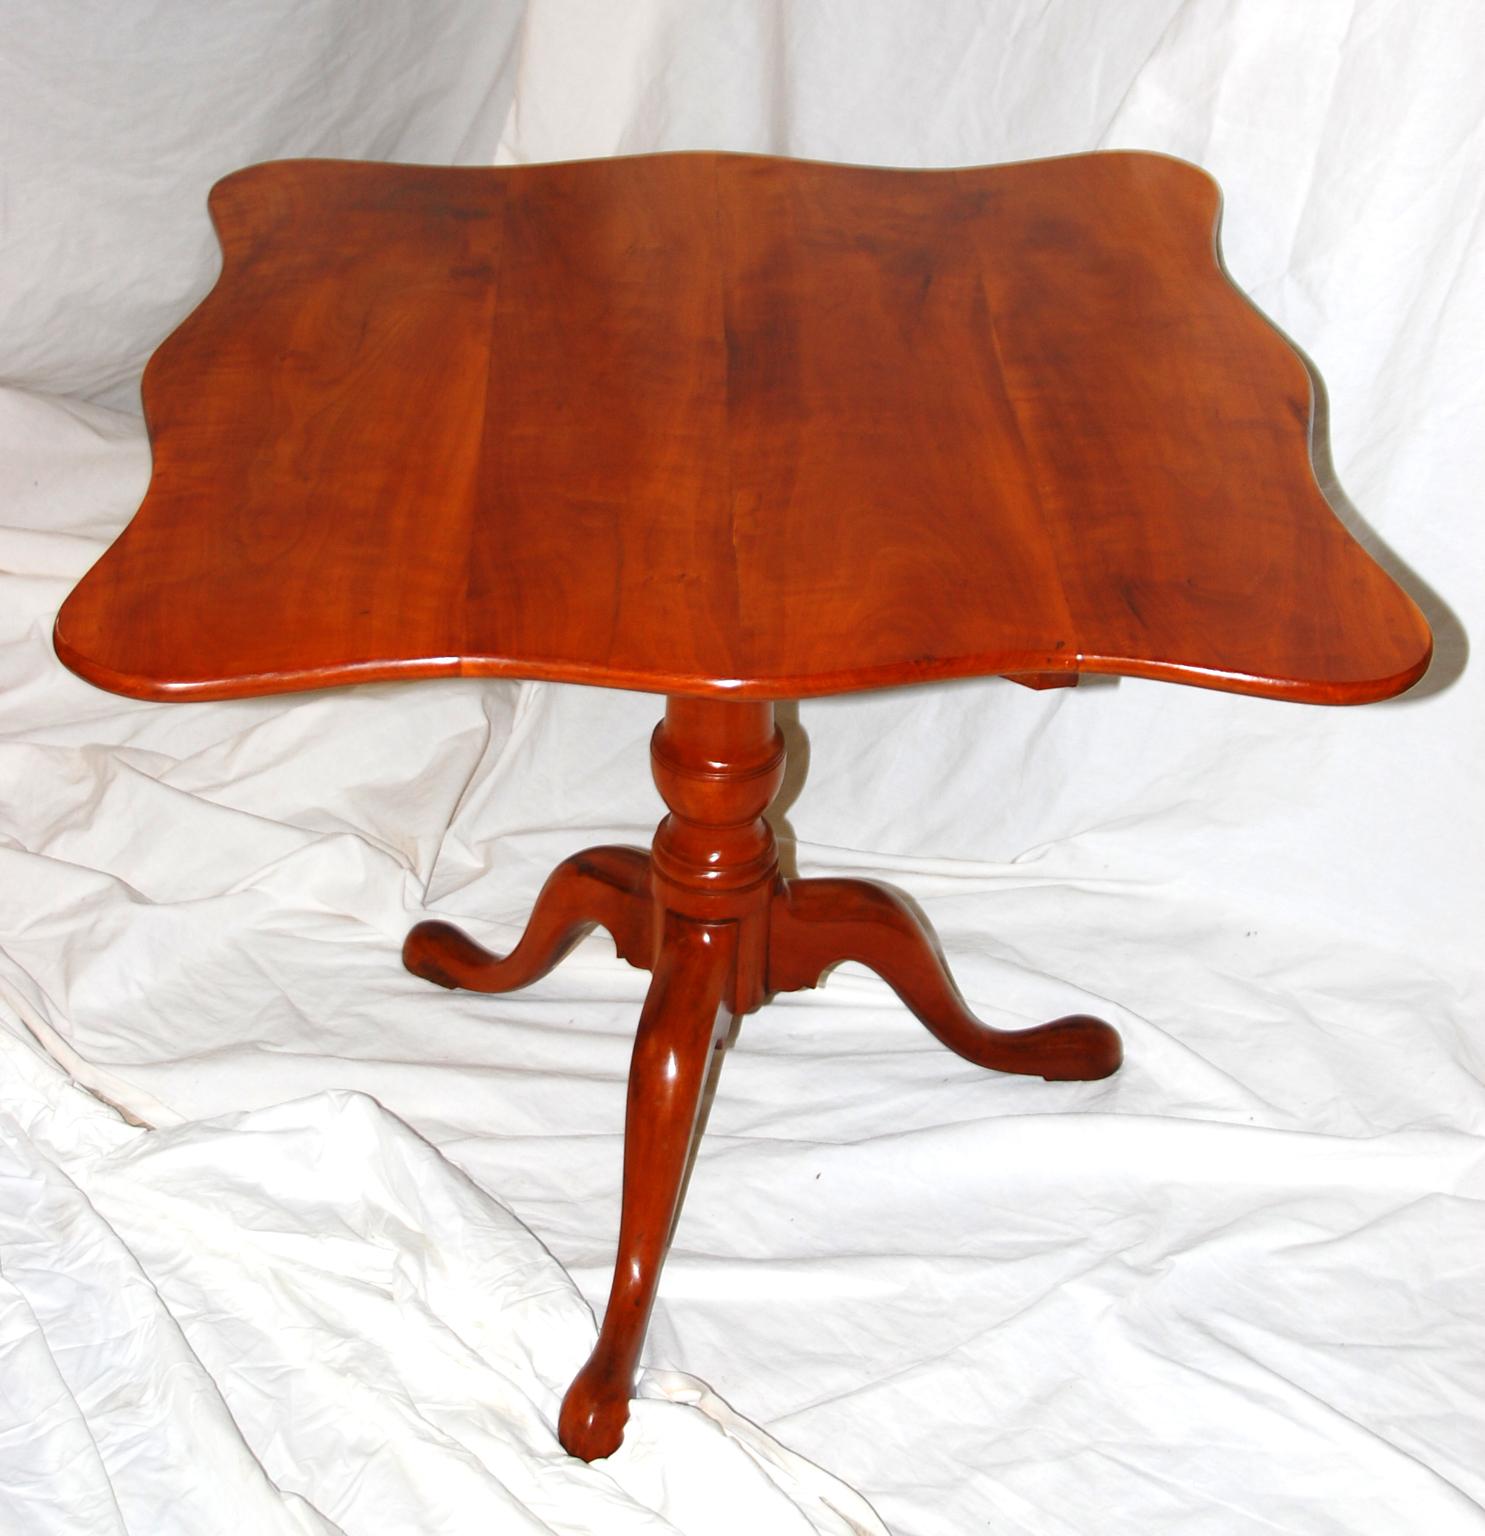 American federal tripod tilt-top table in apple wood, probably of Connecticut origin. The graceful scalloped edge of the top and cabriole legs along with the well proportioned vase turned stem set this table apart from the more usual rectangular or